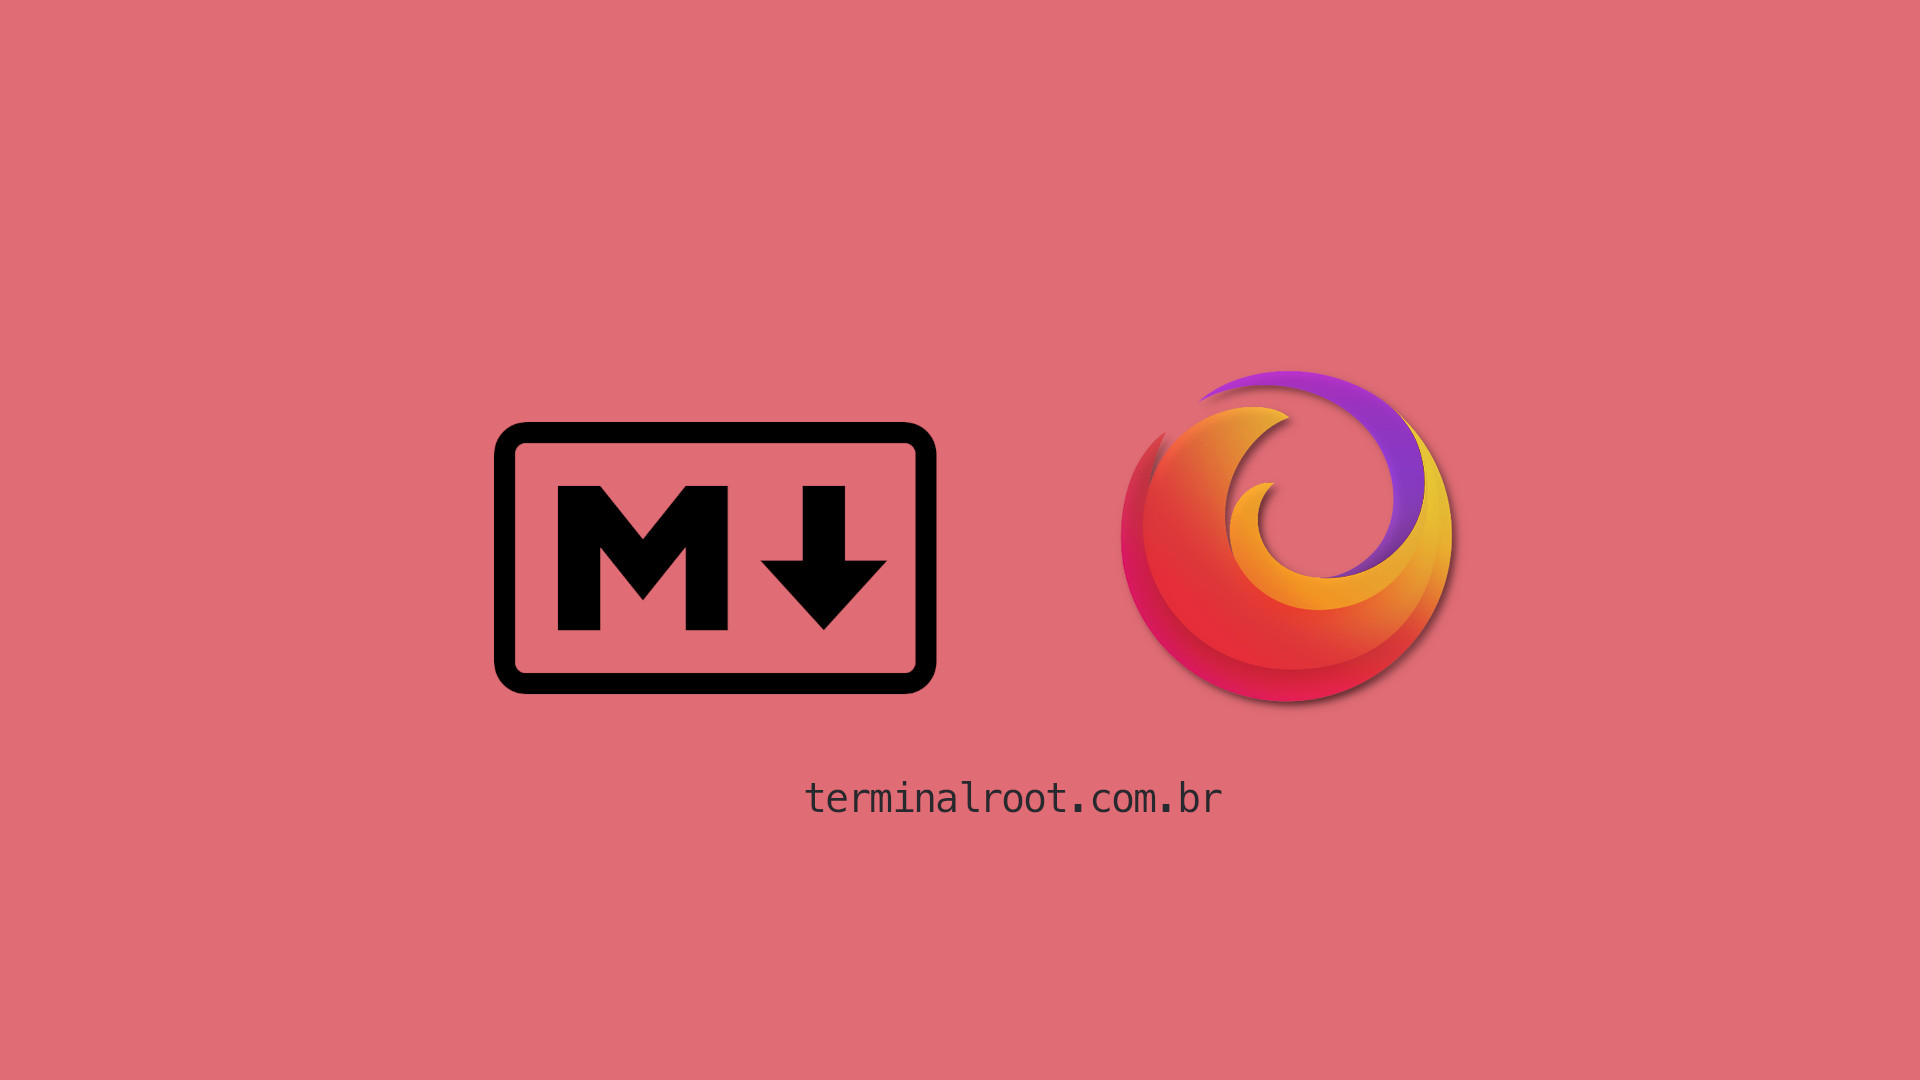 How to open Markdown files with md extension in Firefox